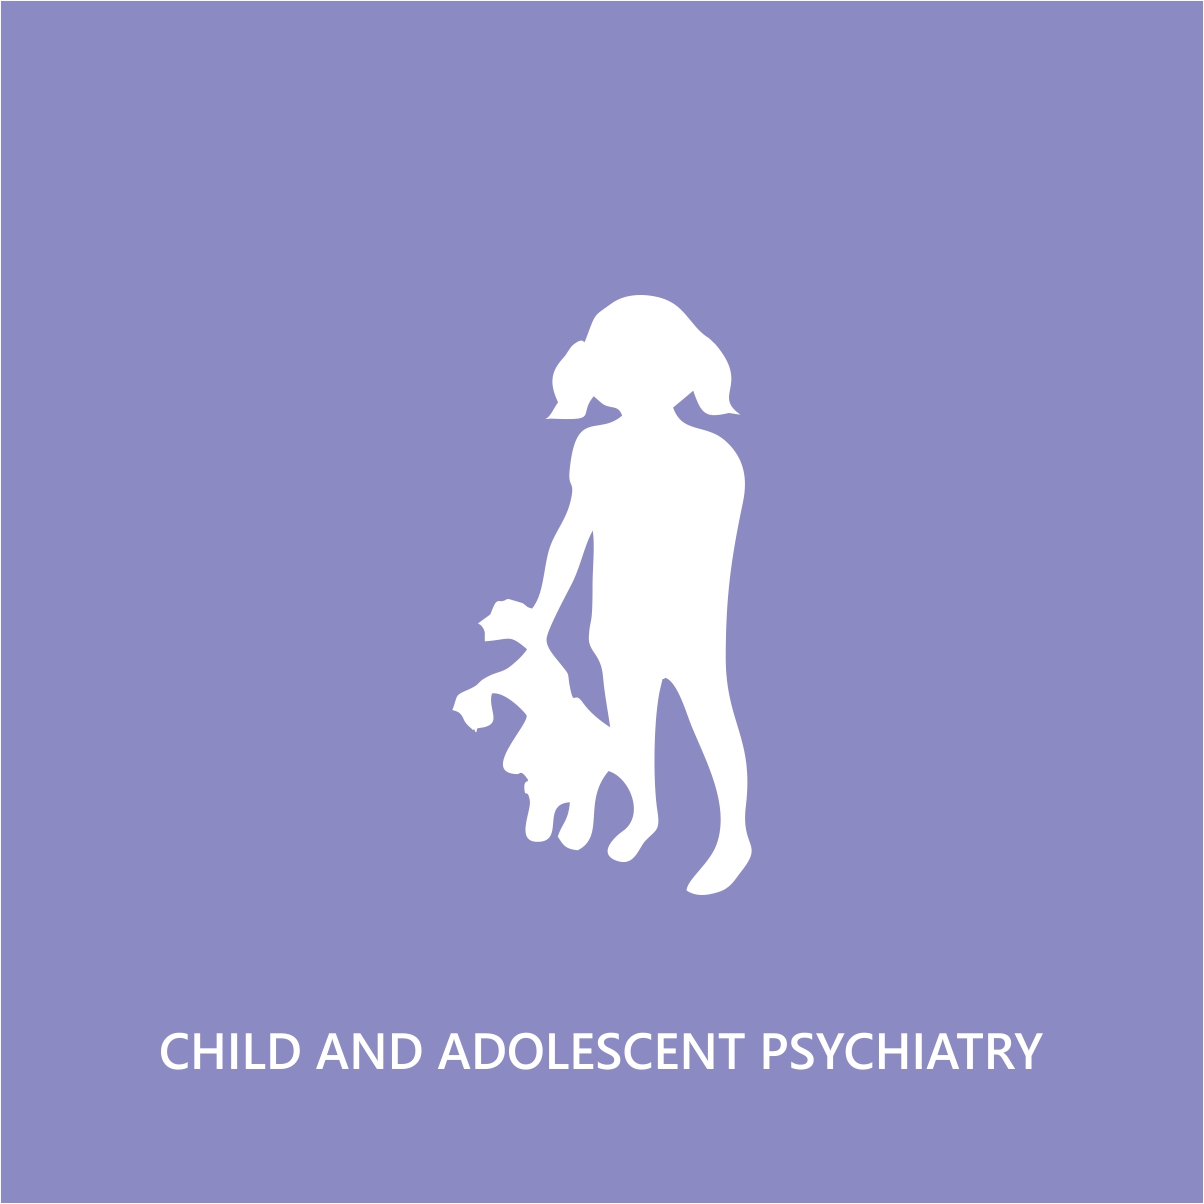 Child and Adolescent Psychiatry Image